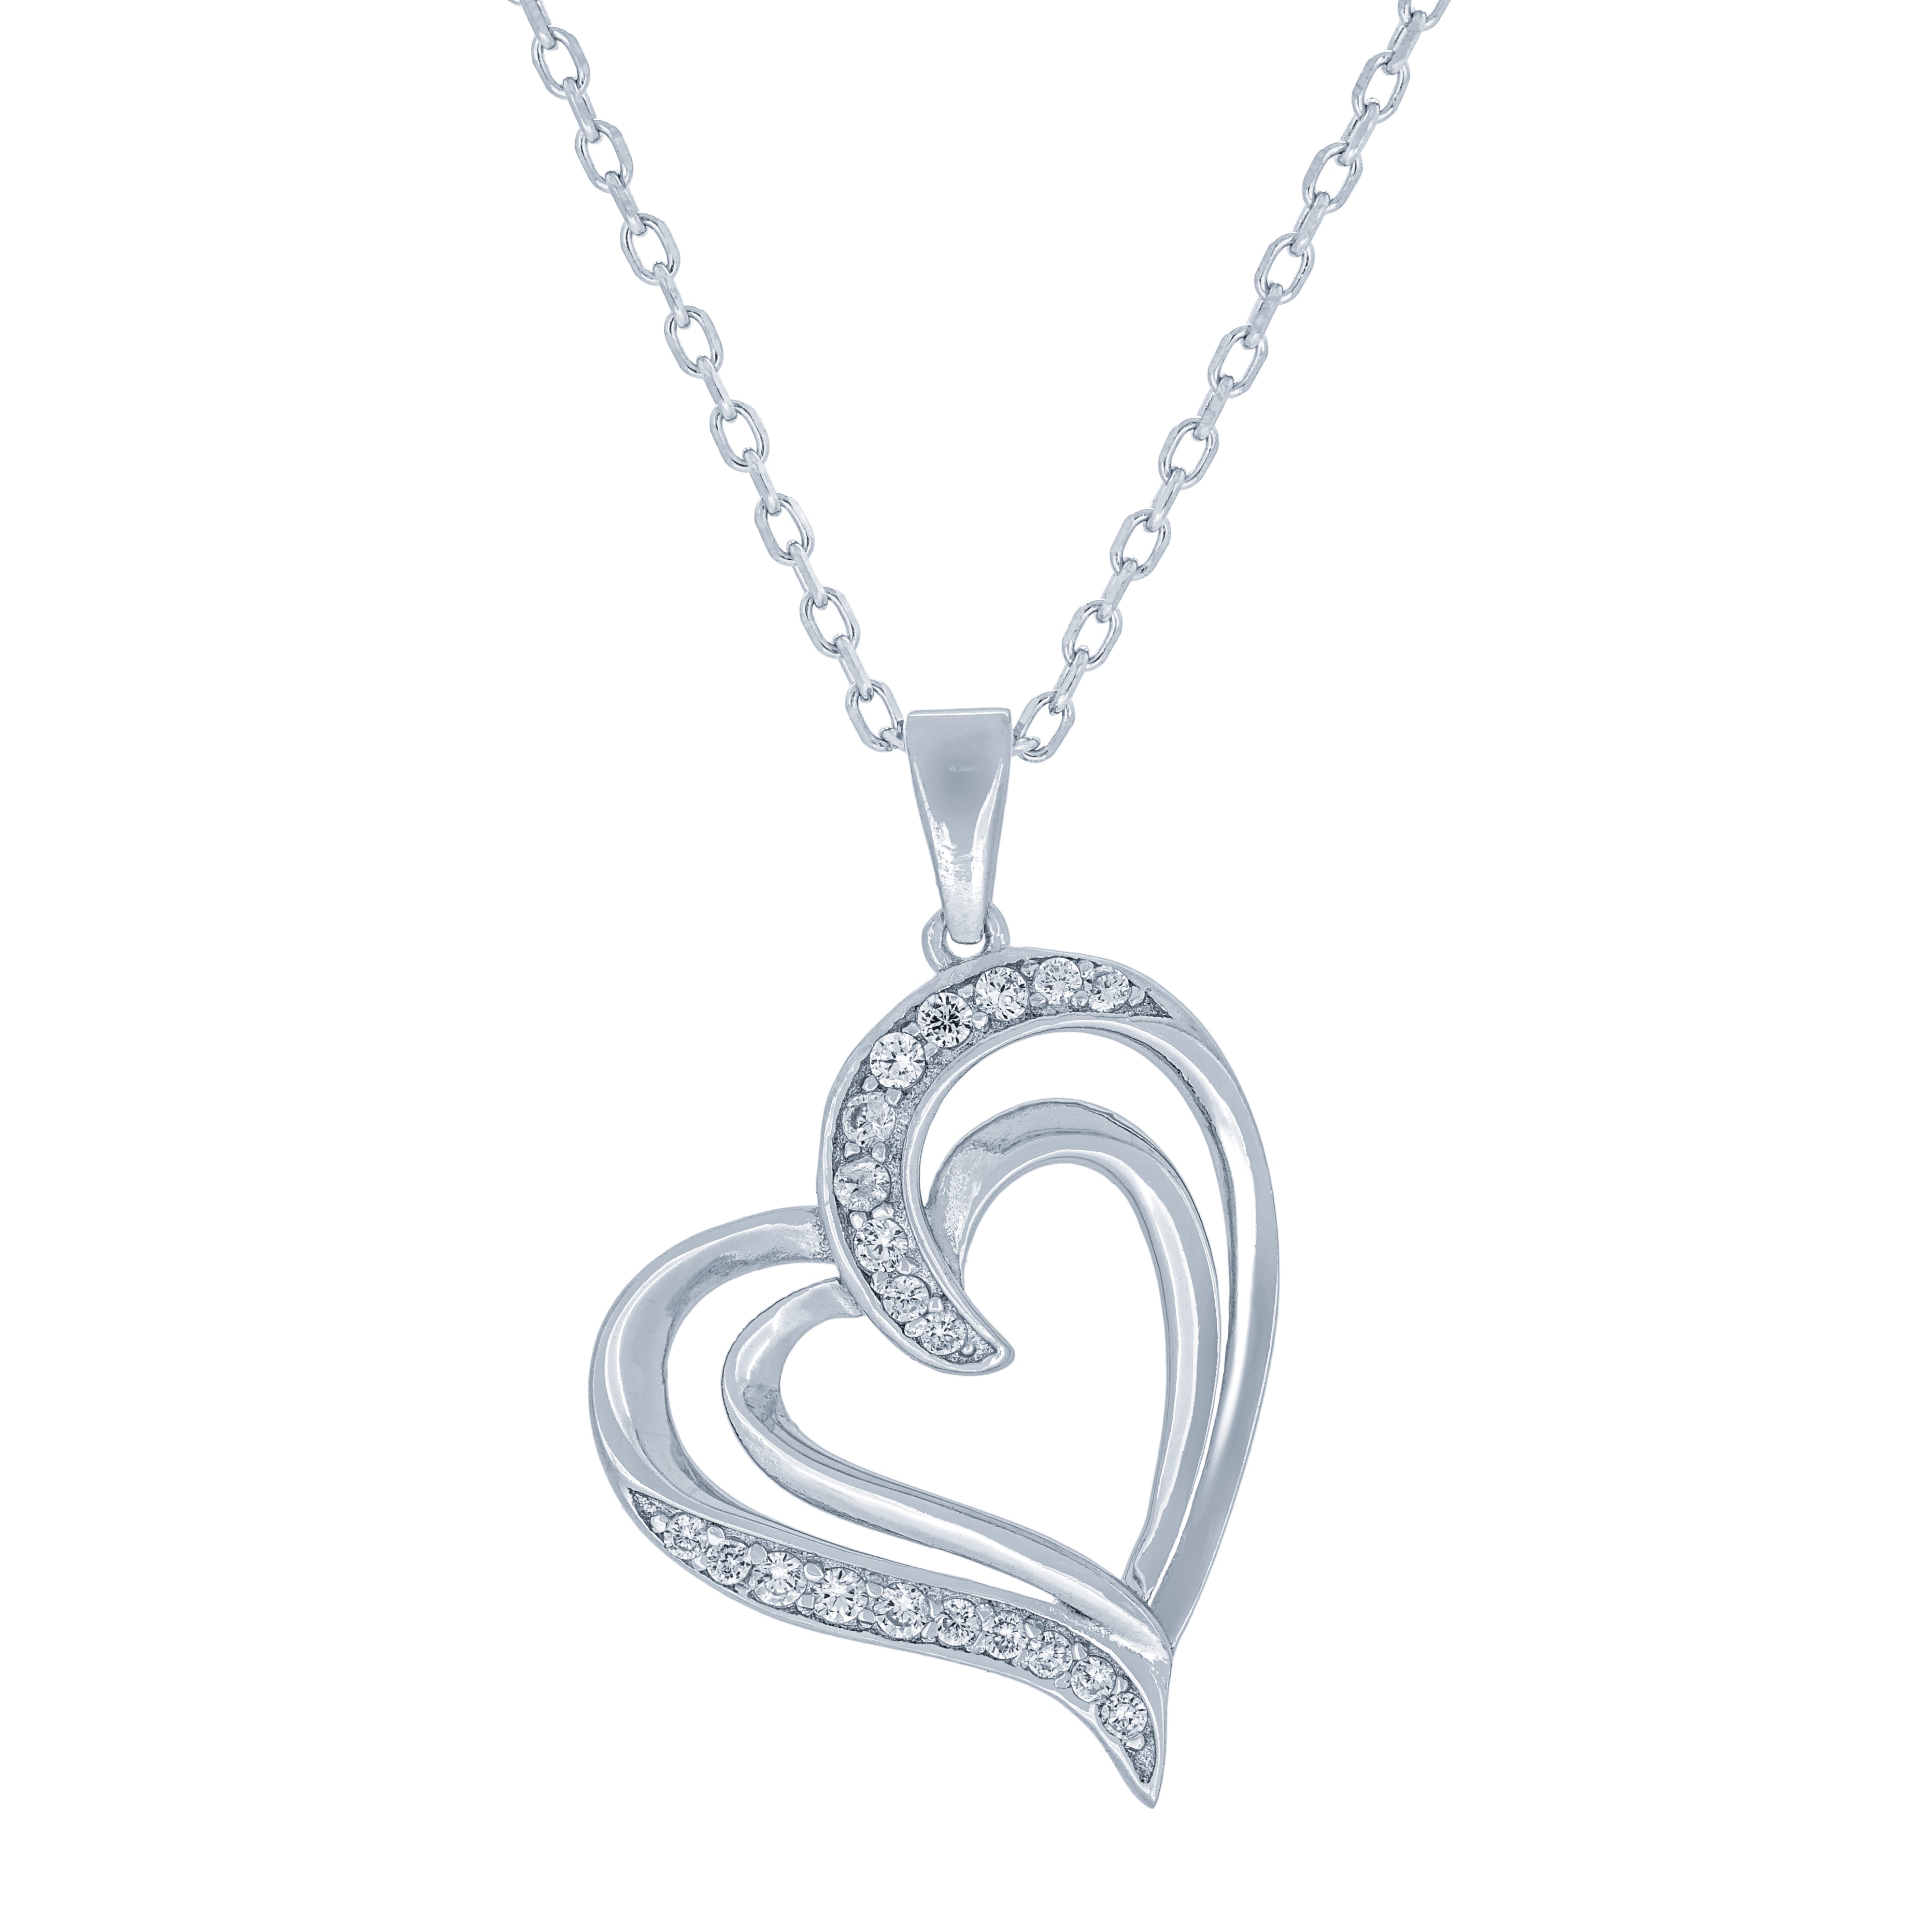 (100119) White Cubic Zirconia Heart Pendant Necklace In Sterling Silver